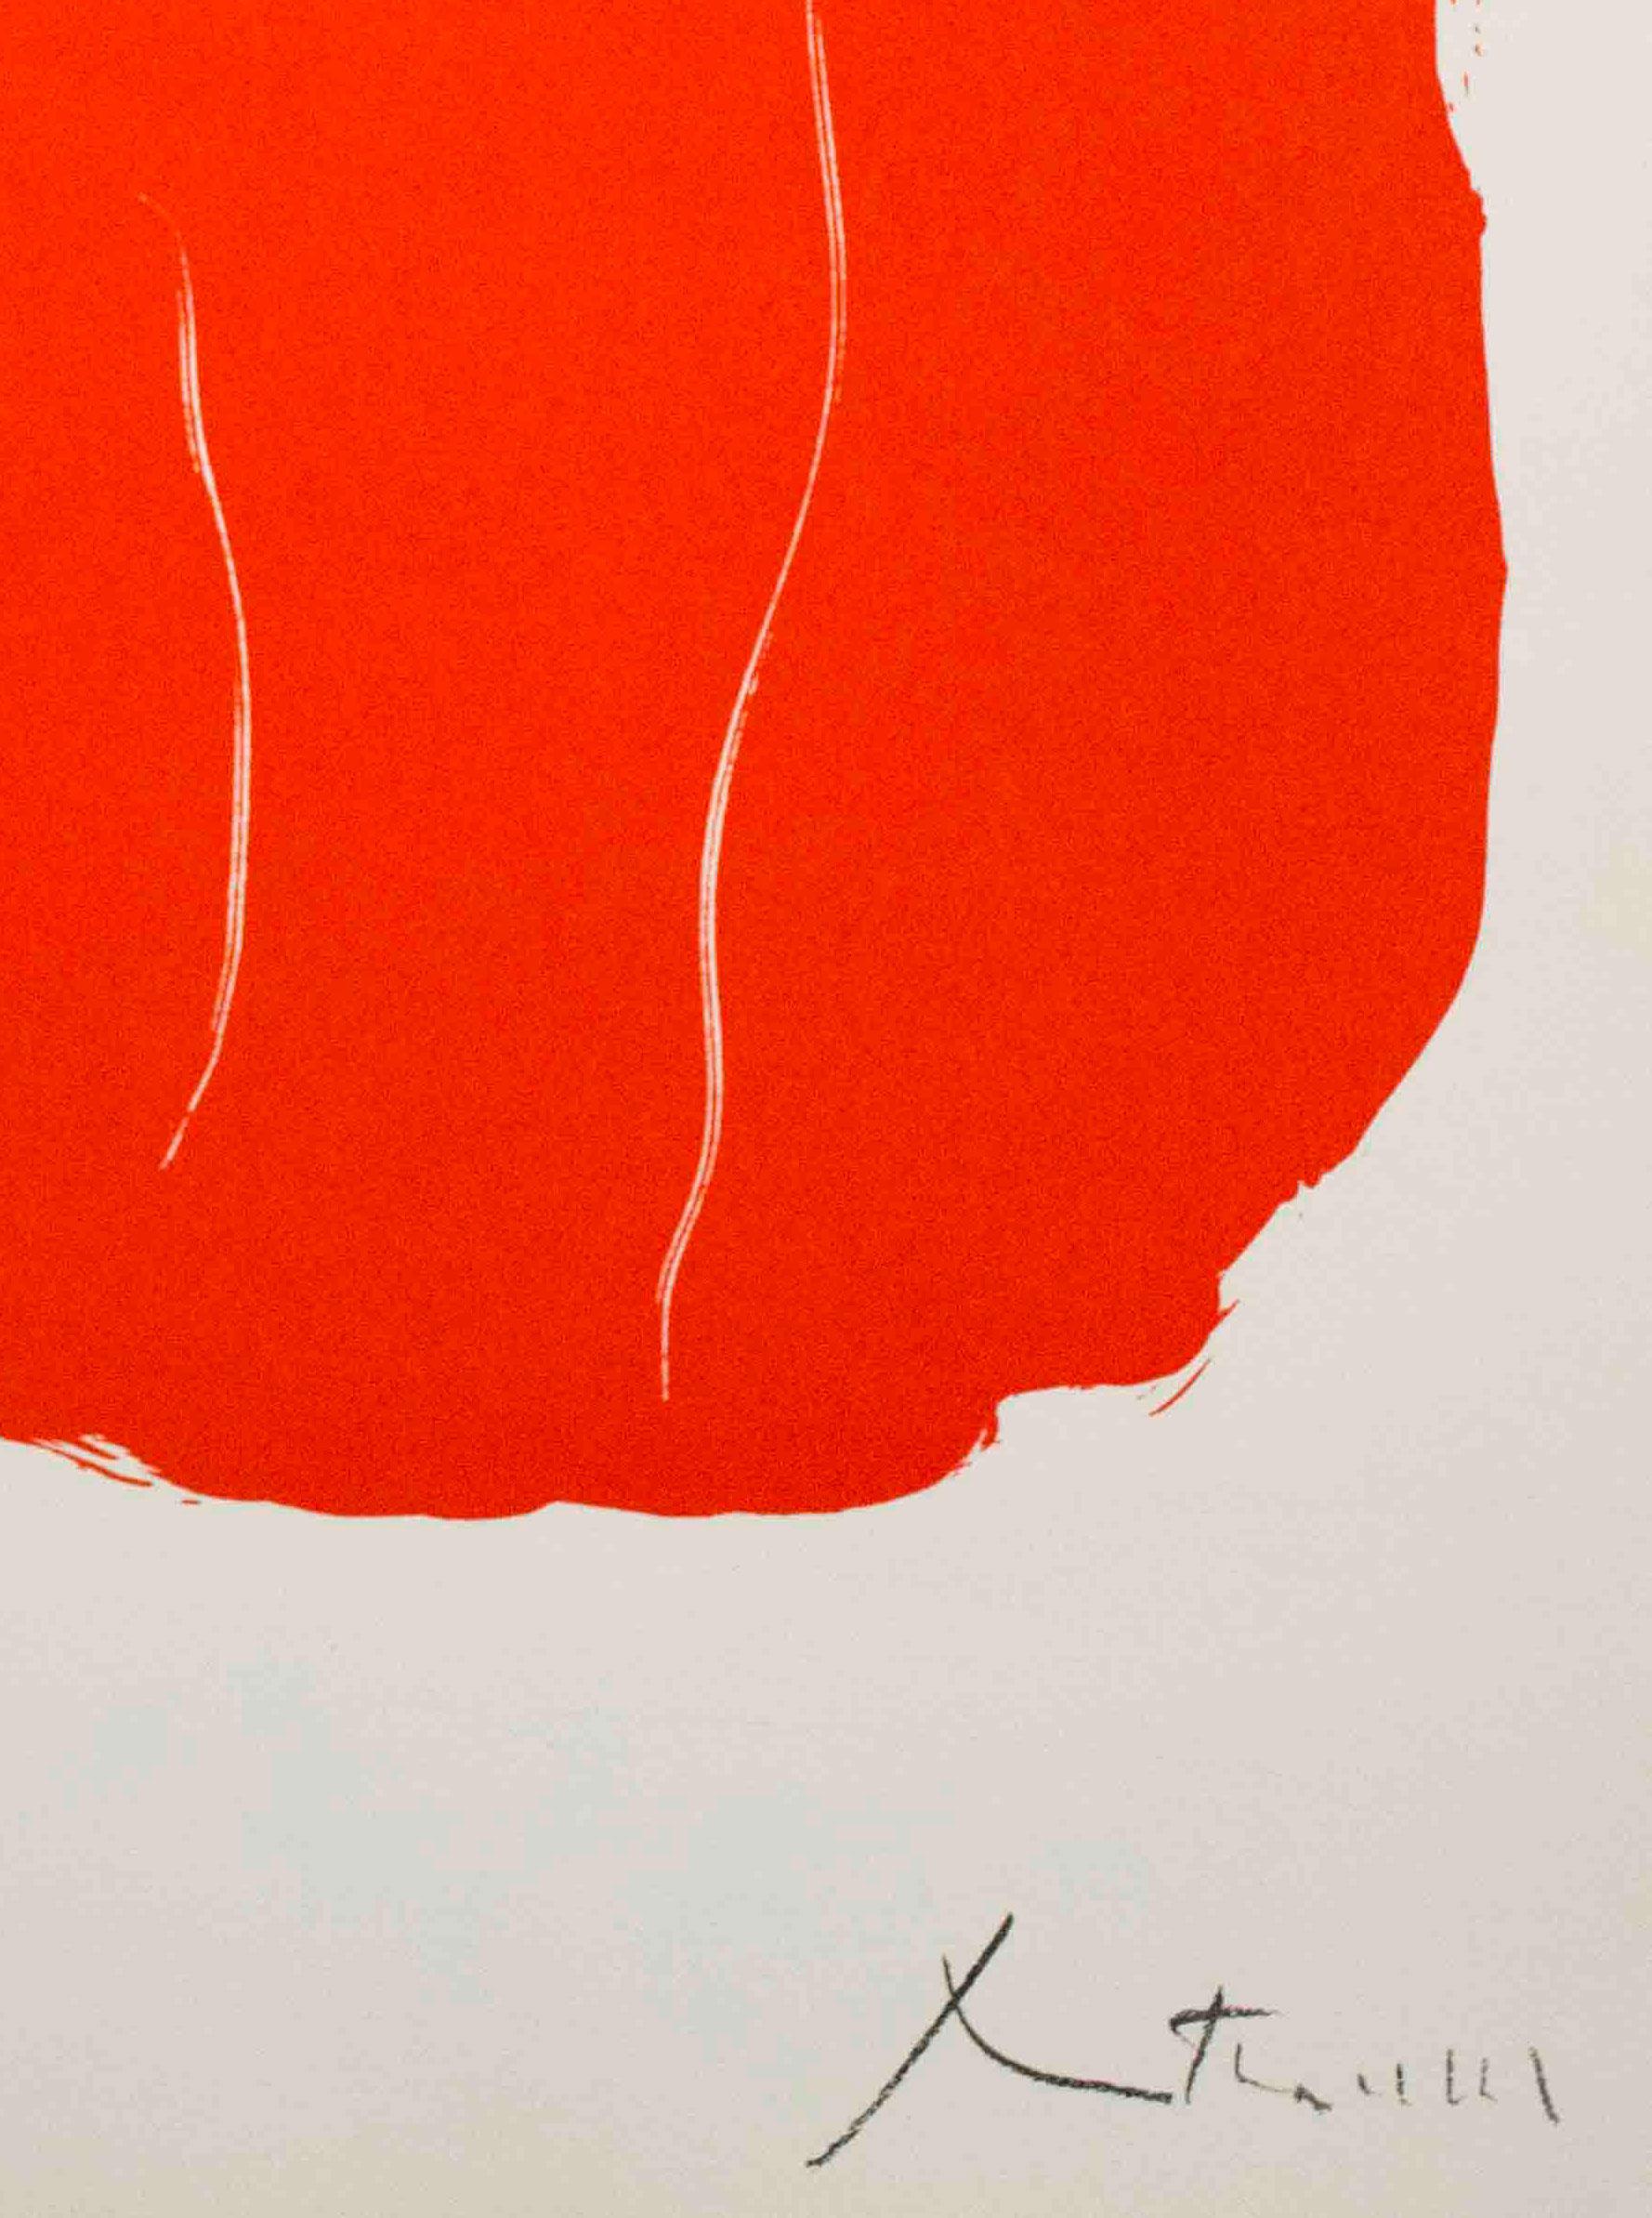 Tricolor 137 - Red Abstract Print by (after) Robert Motherwell